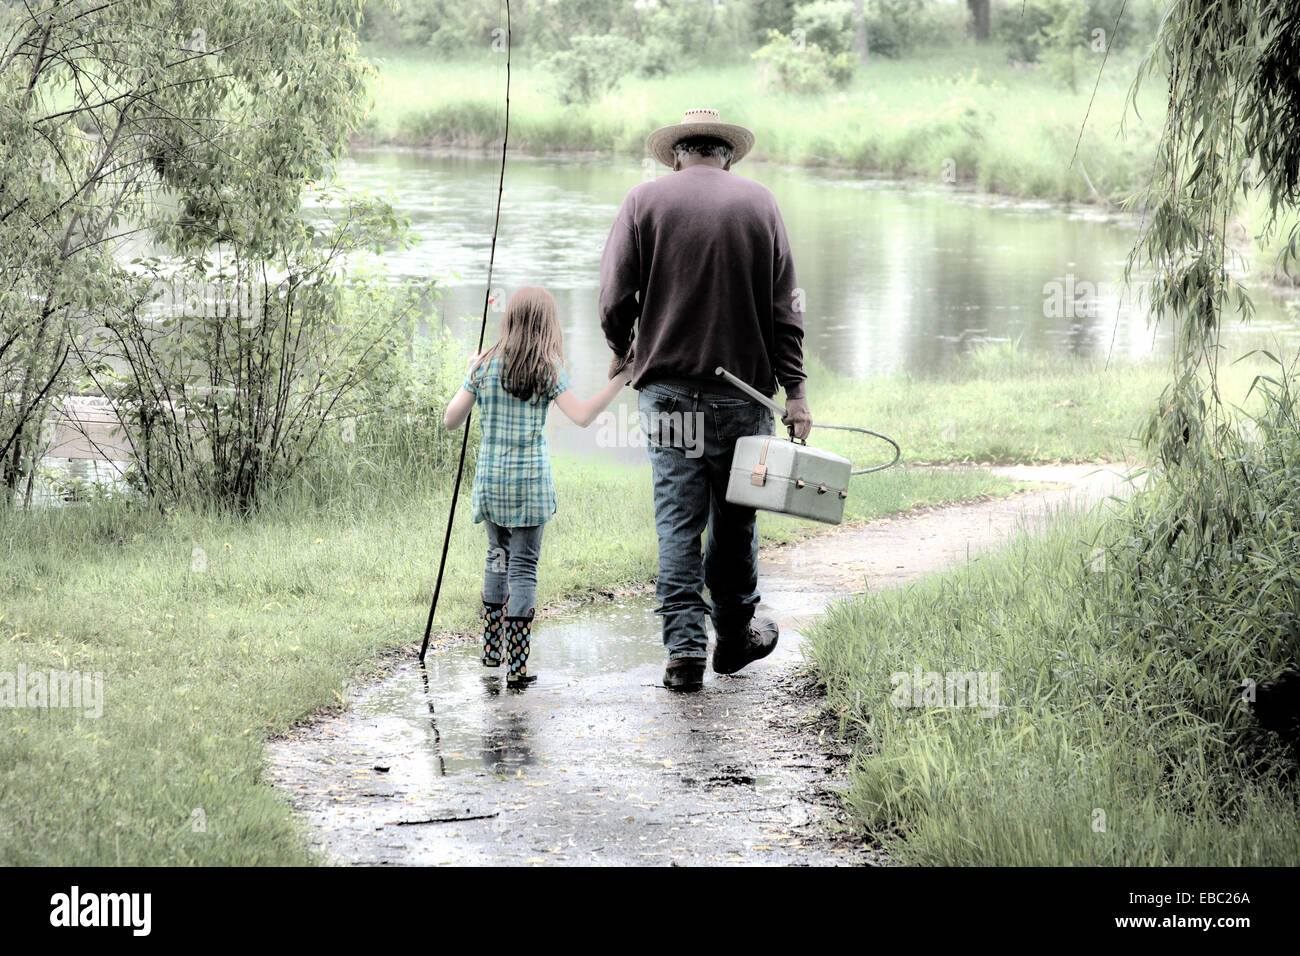 A grandfather and granddaughter fishing together Stock Photo